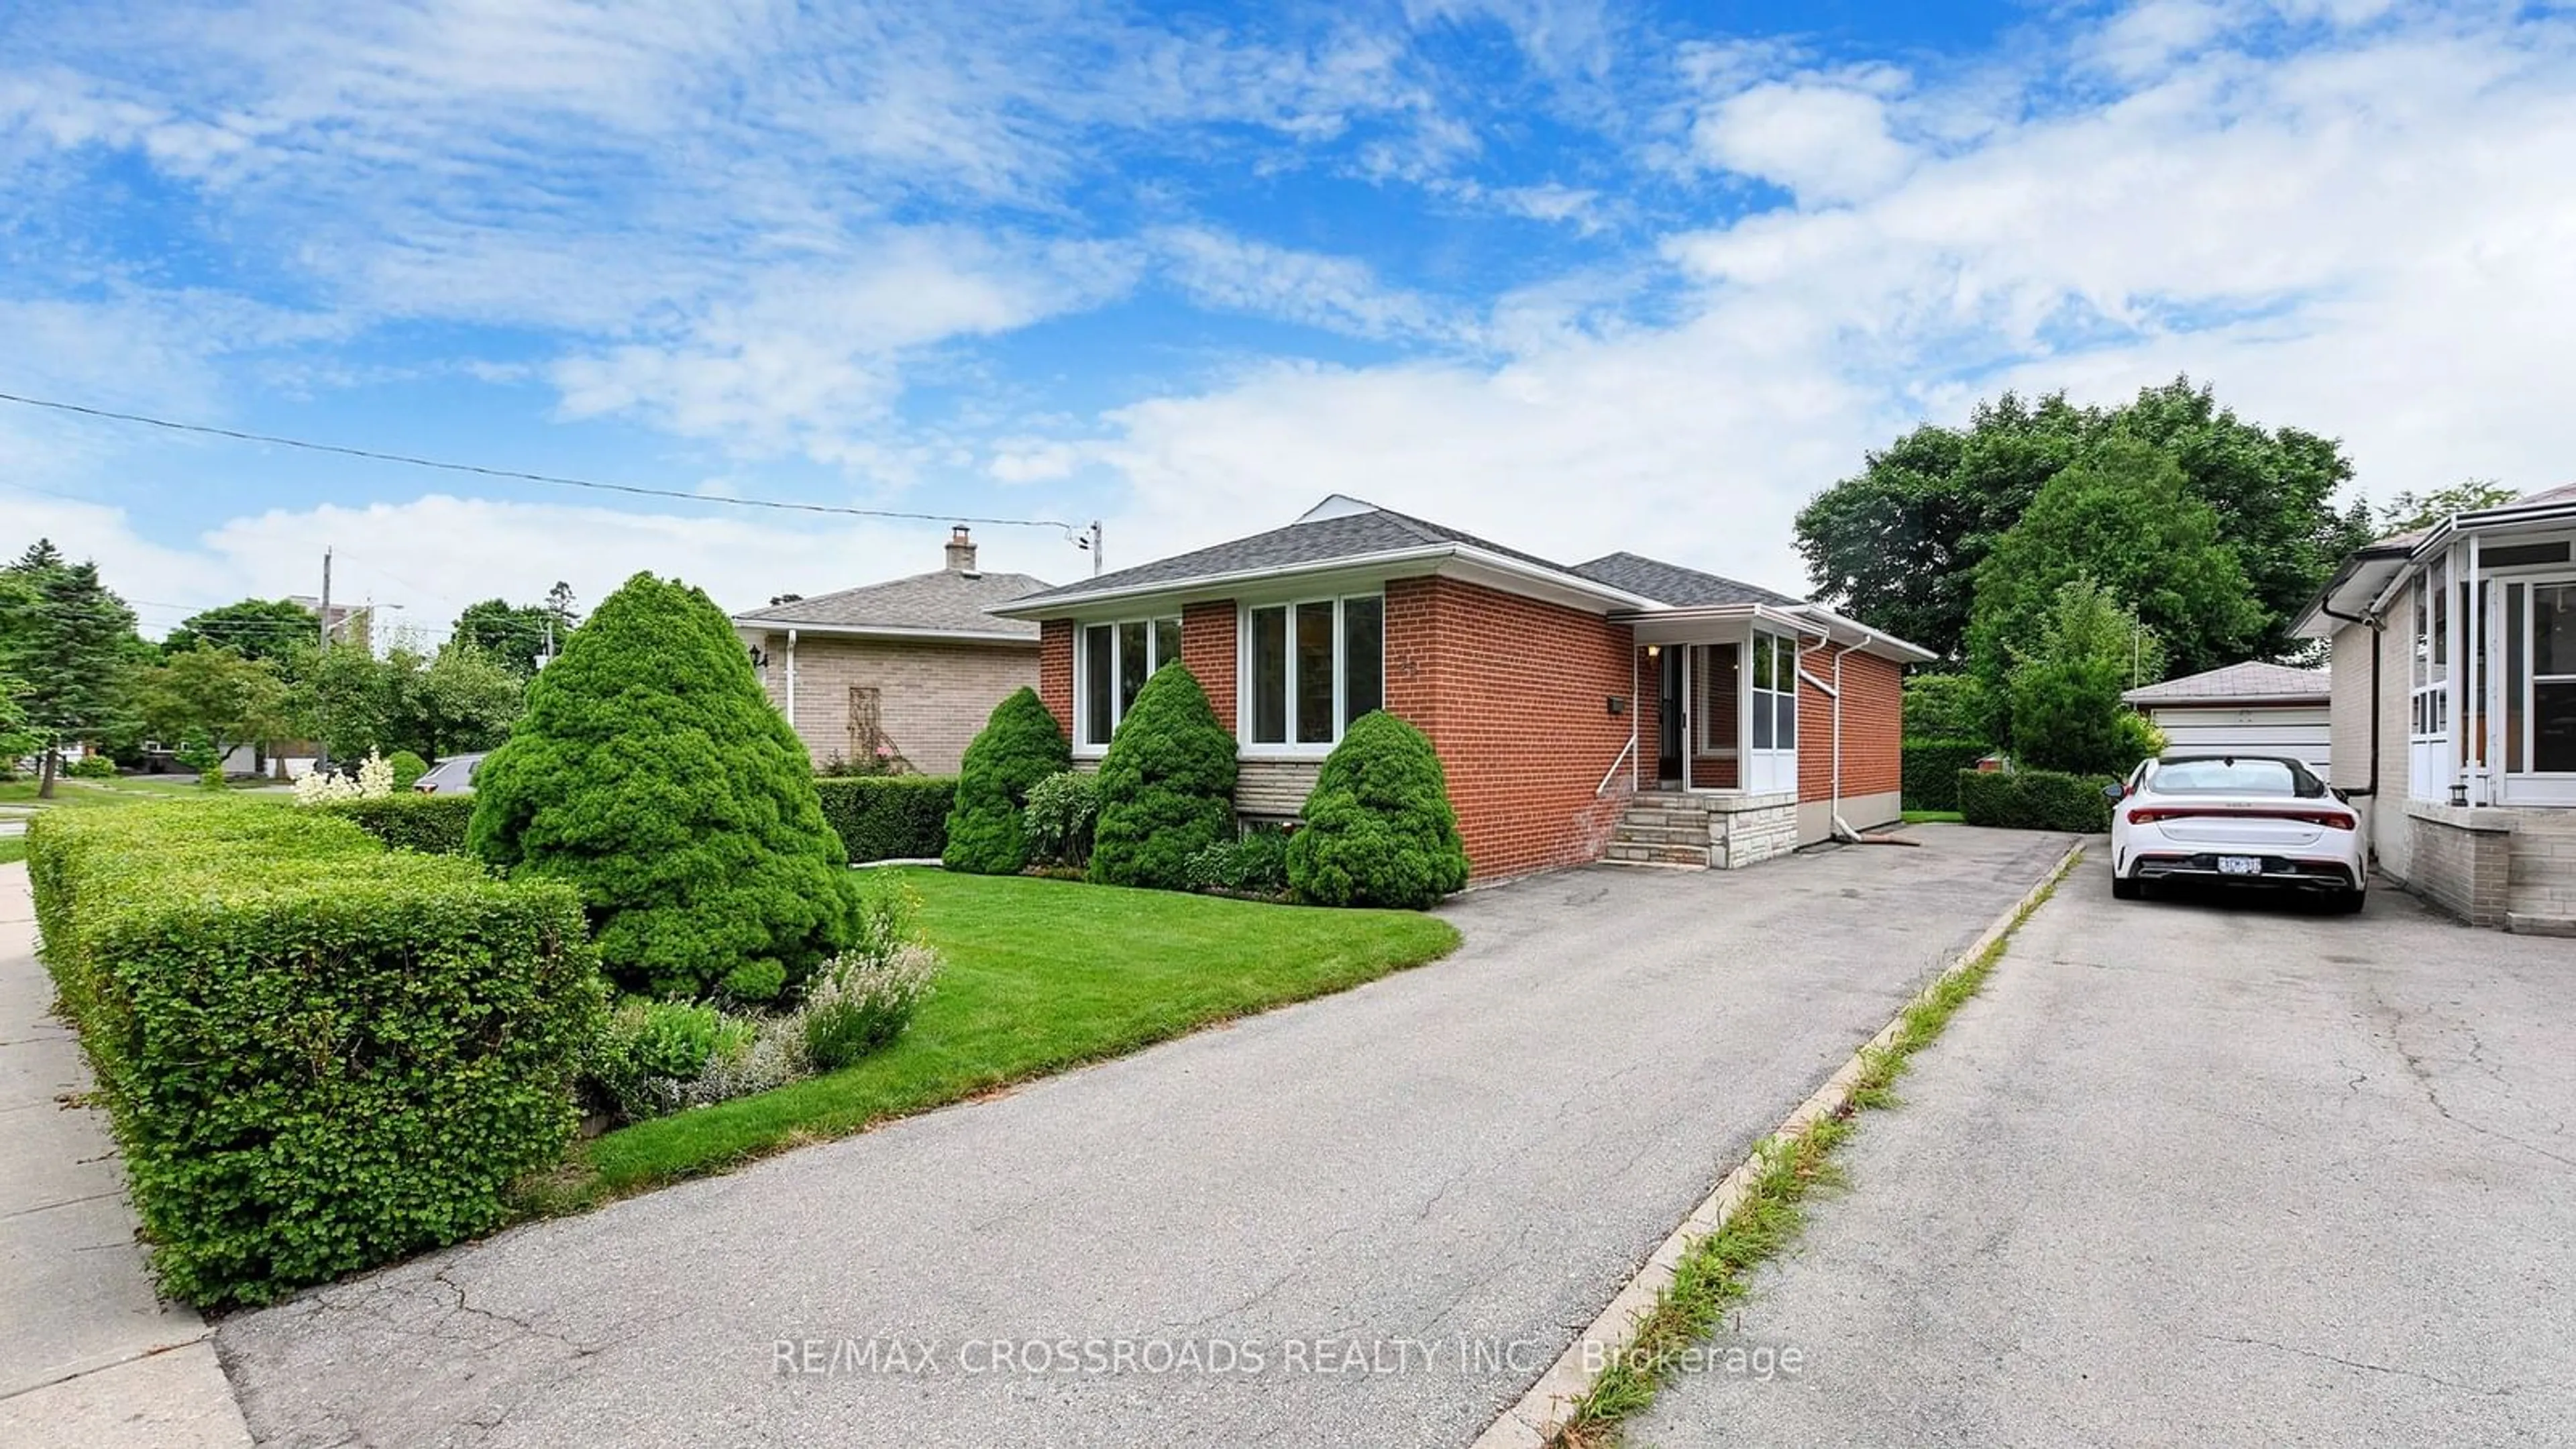 Frontside or backside of a home for 35 Murmouth Rd, Toronto Ontario M1T 2P9